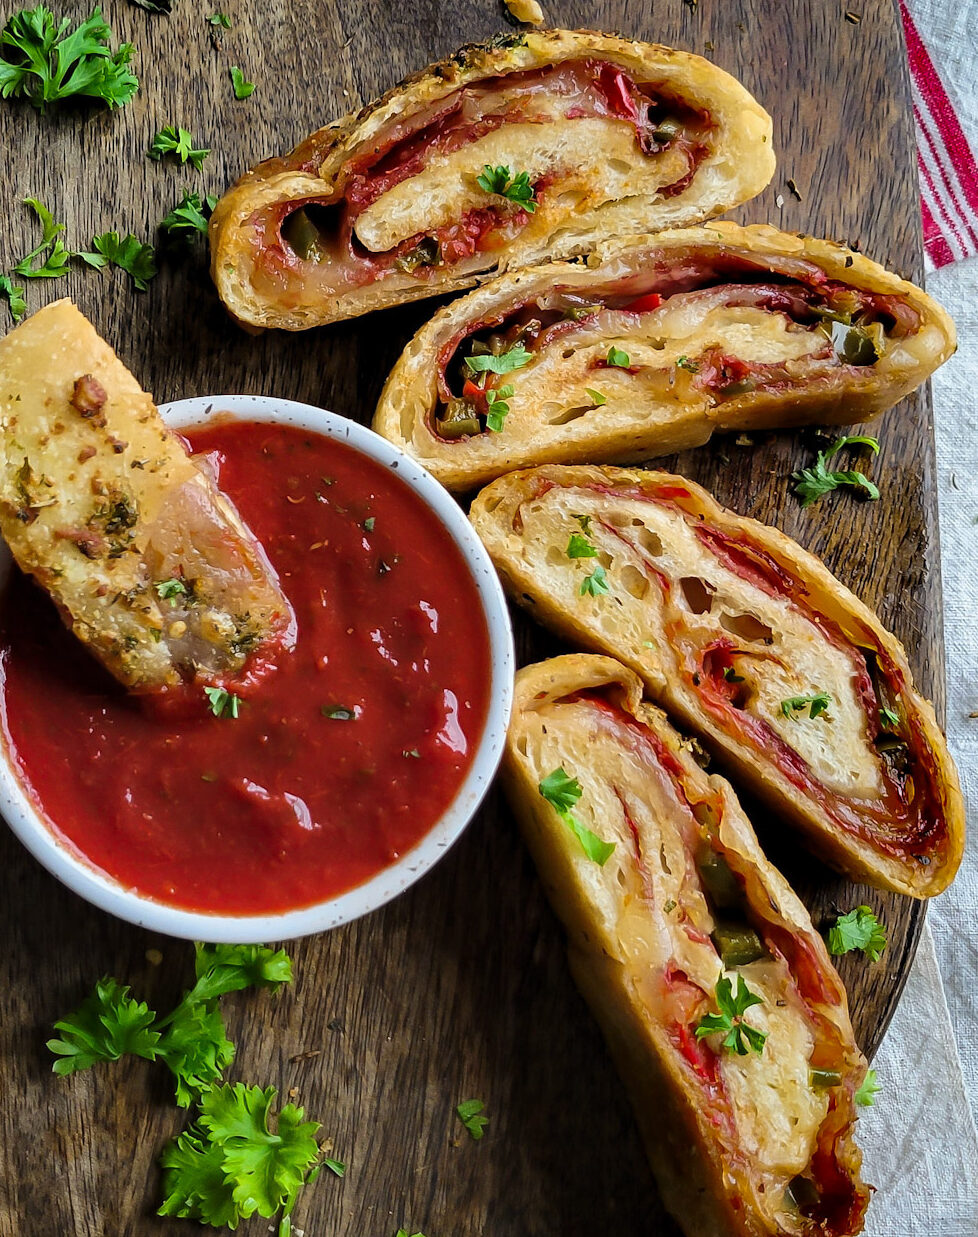 A cutting board with sliced stromboli (rolled pizza) with harissa dipping sauce, one slice dipped into the bowl.